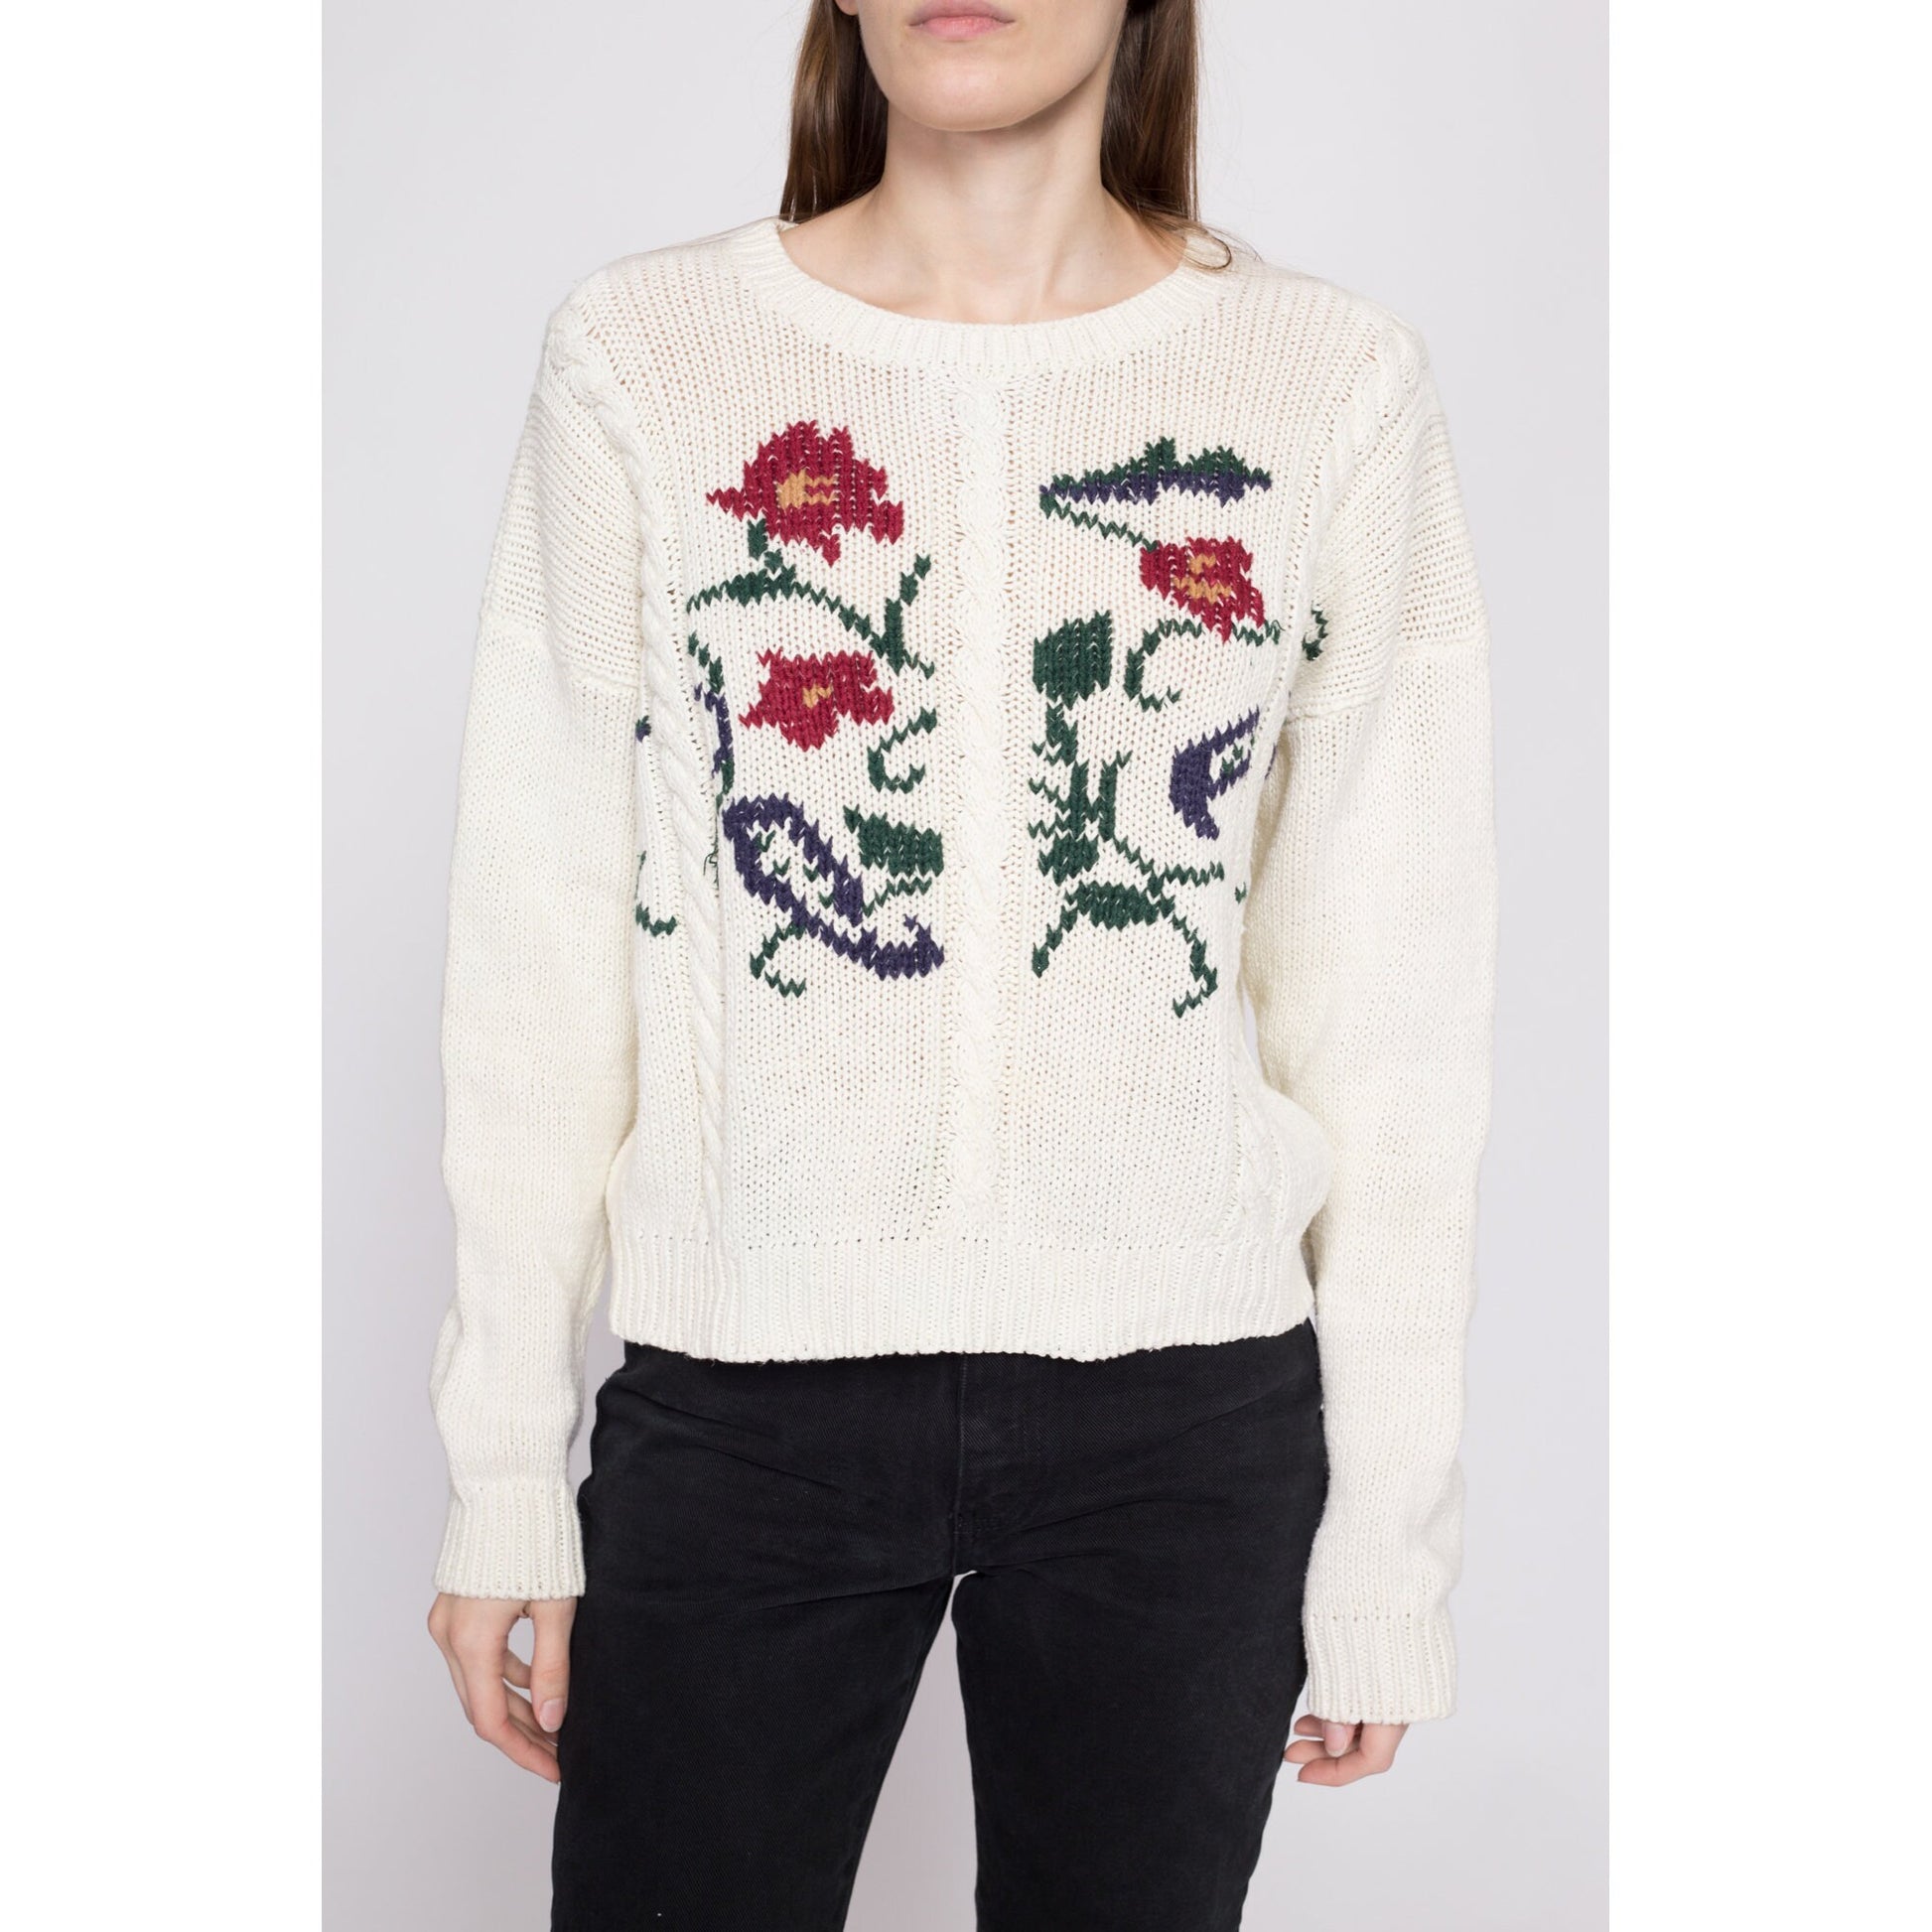 Long Sleeve Floral Knit Sweater